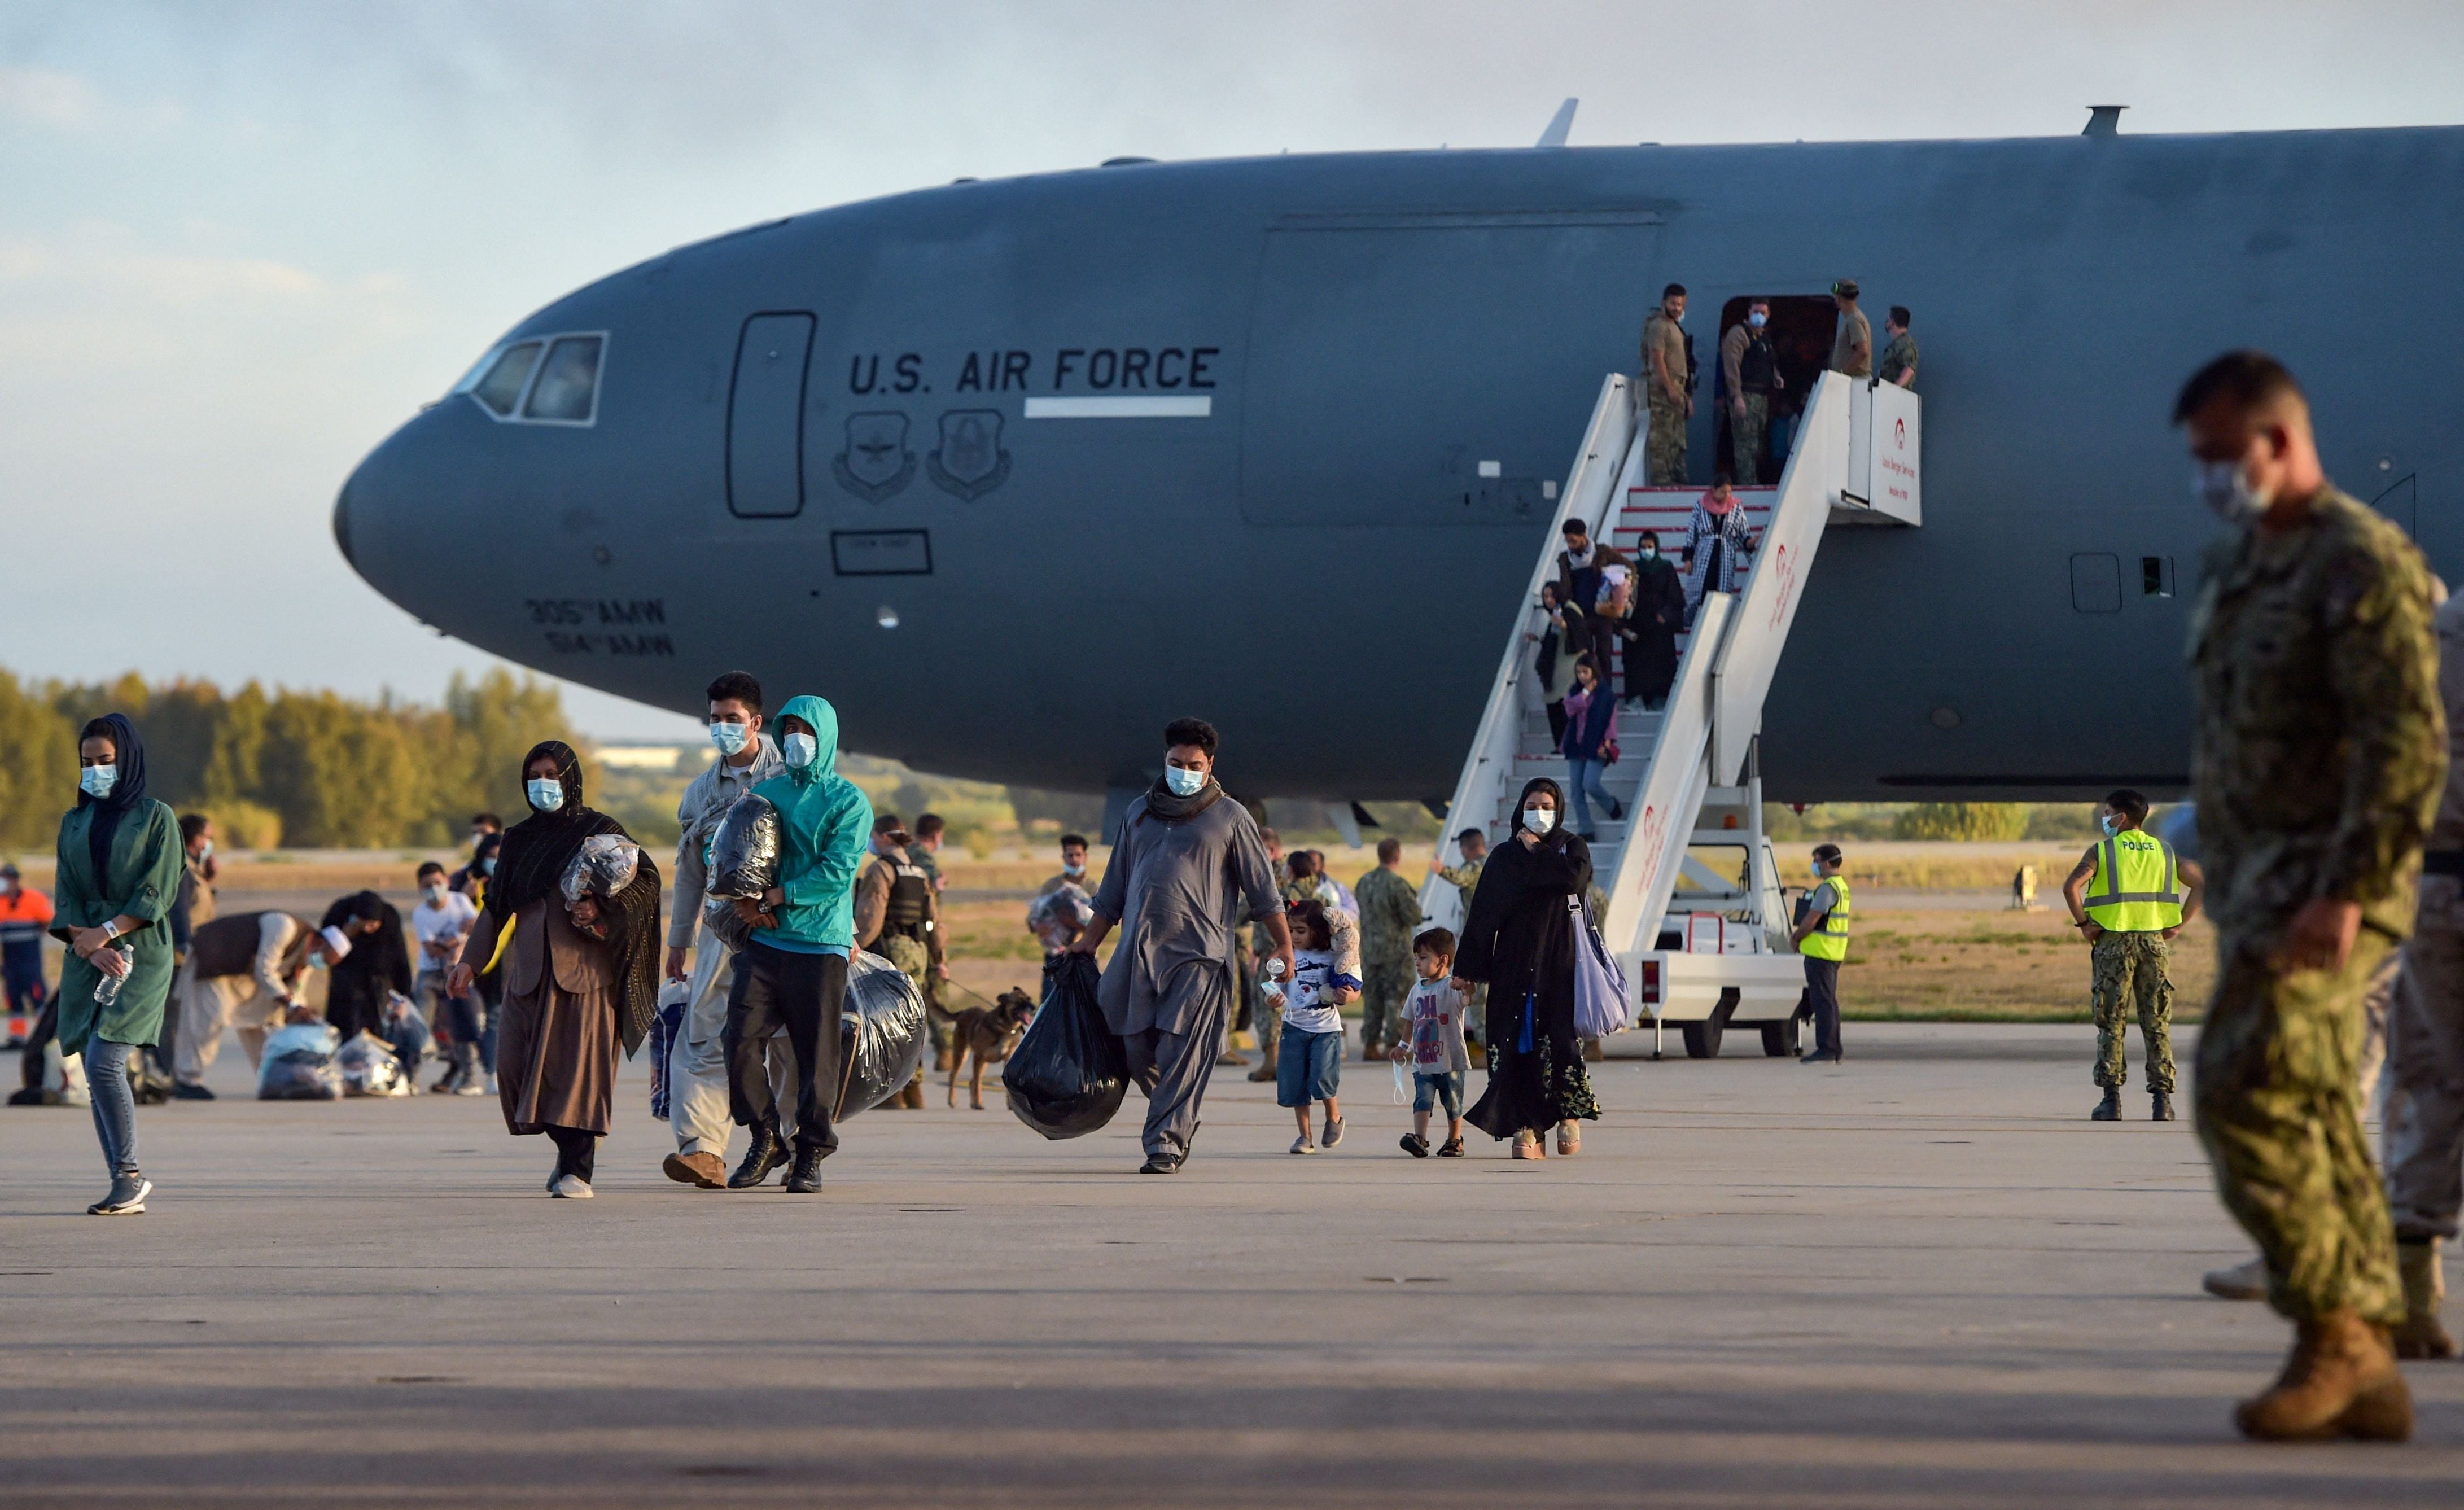 Refugees disembark from a US air force aircraft after an evacuation flight from Kabul at the Rota naval base in Rota, southern Spain, on 31 August 2021. - Japan was heavily criticised for evacuating just one passenger on its C-130 aircraft.